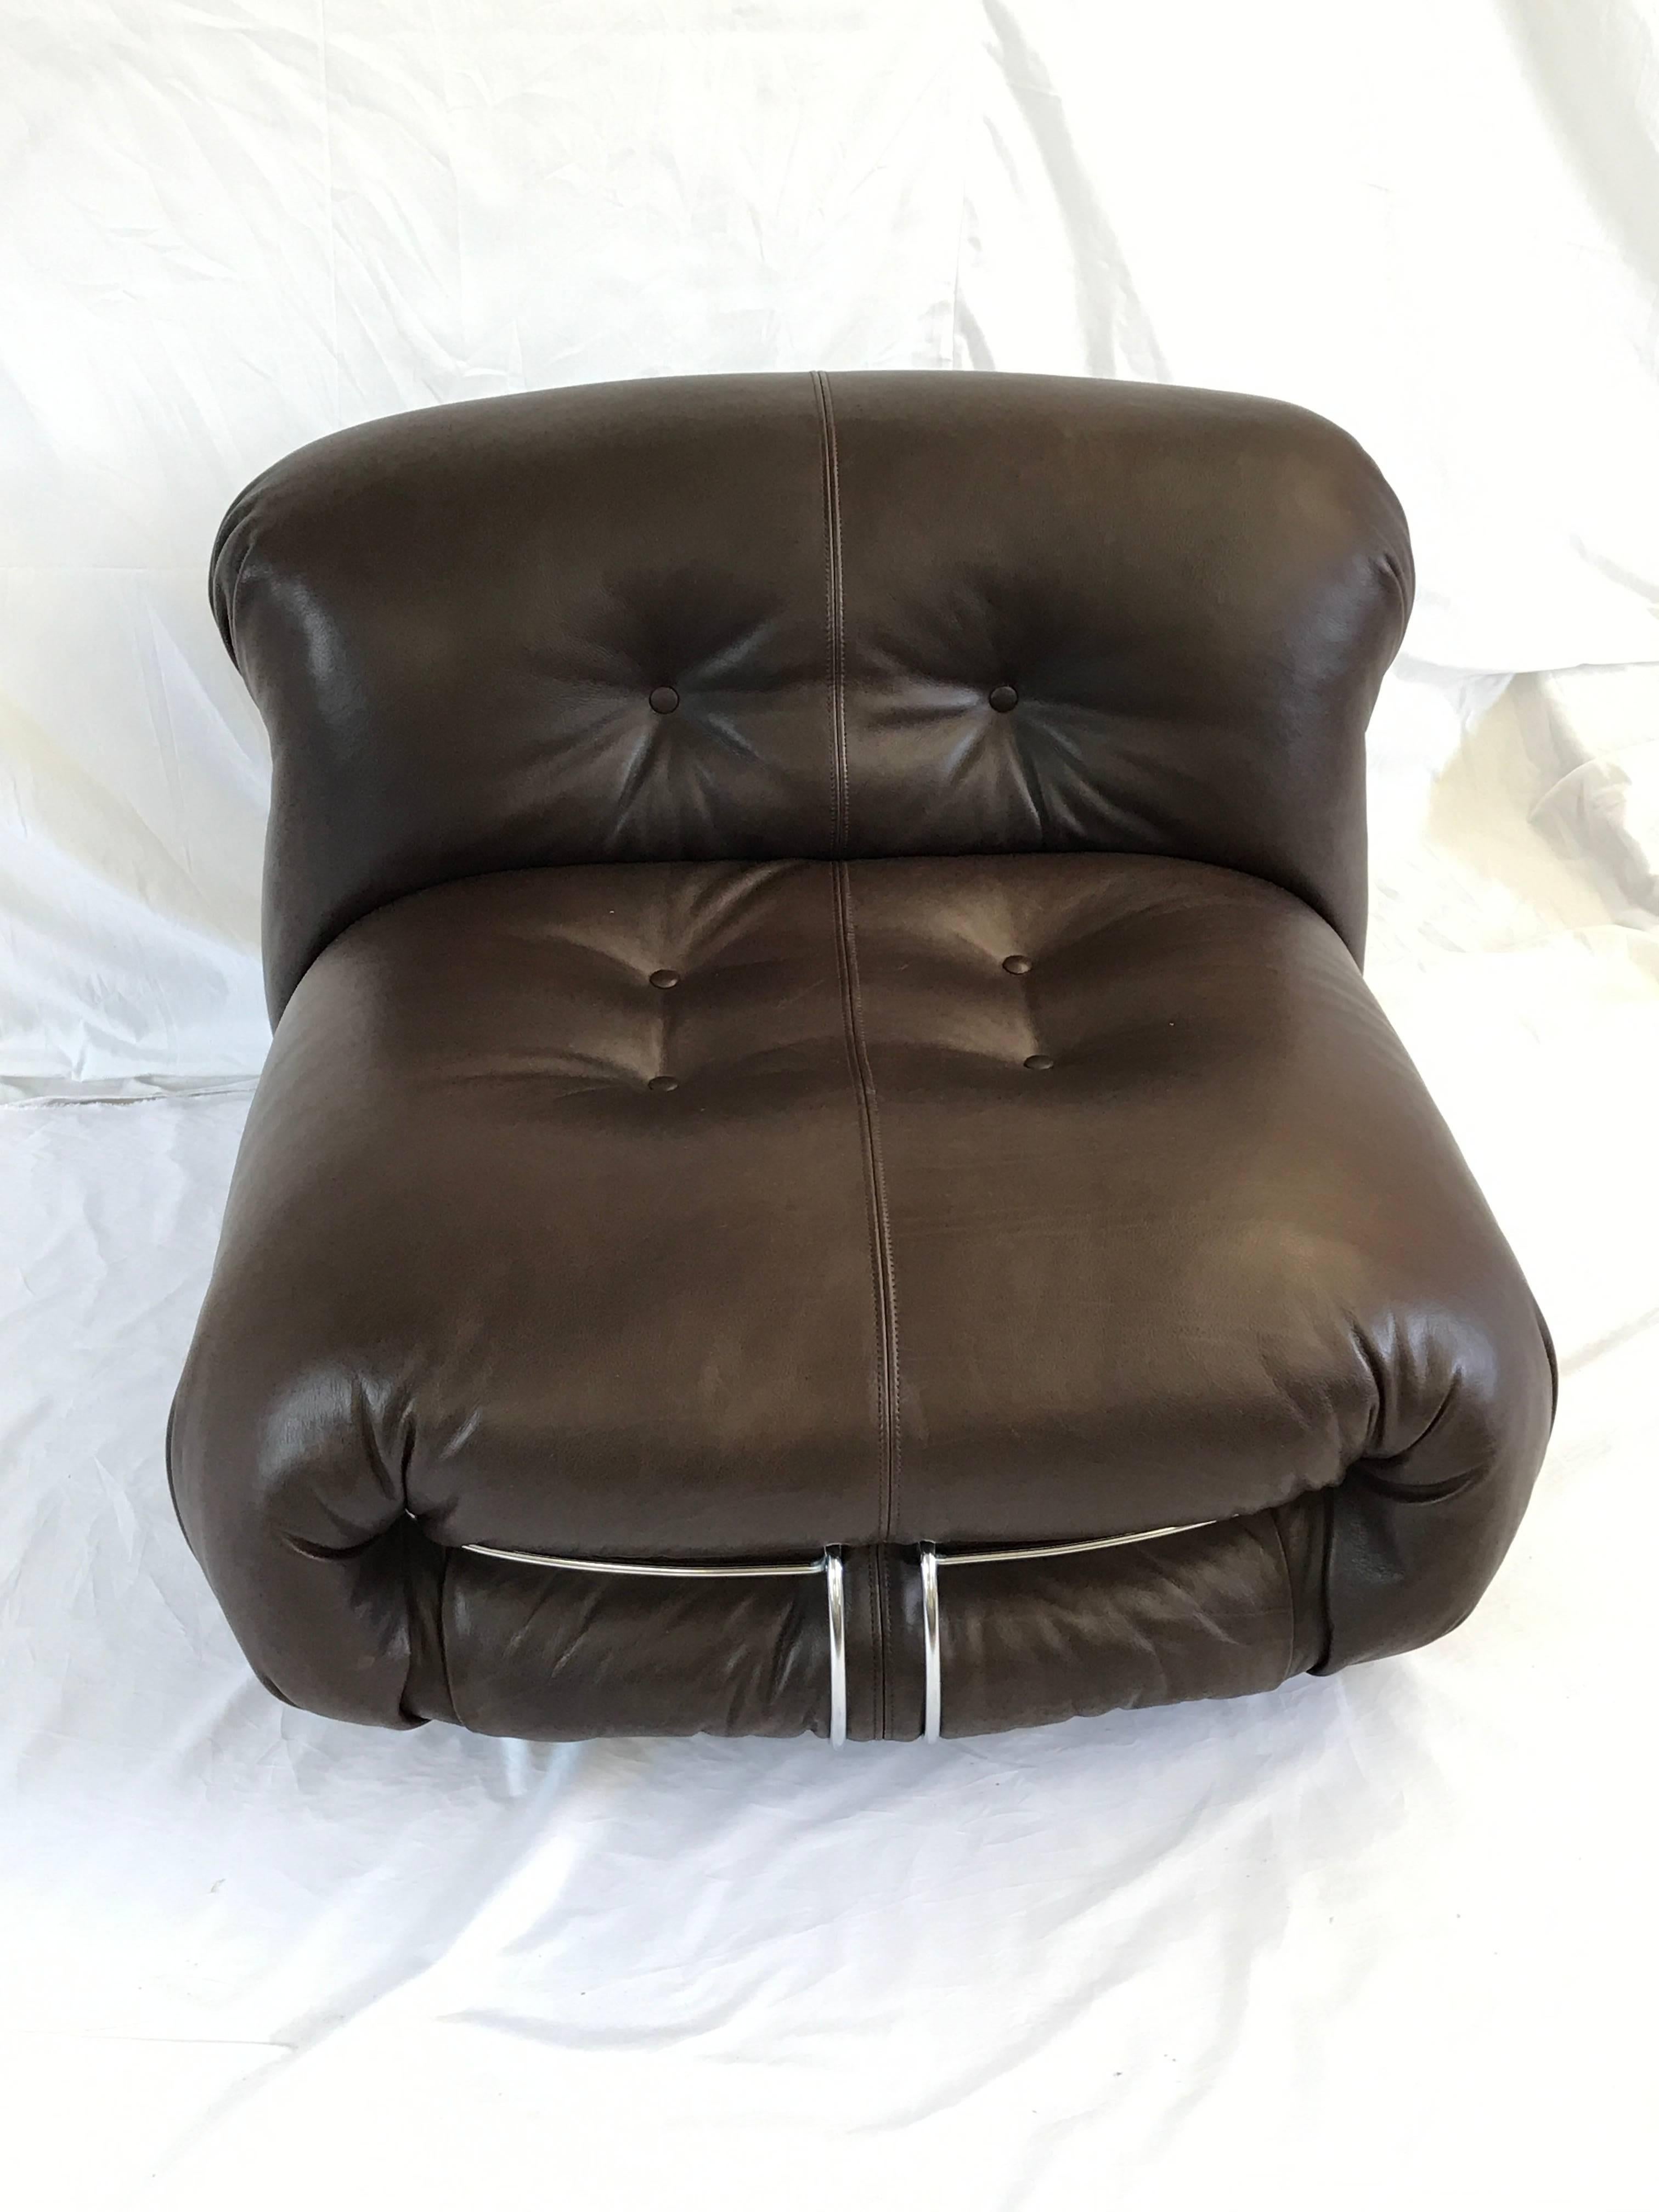 Soriana lounge chairs design Tobia Scarpa 1970s manufactured by Cassina. These lounge chairs will be sold with brand new leather or velvet upholstery.  The leather we use is a full natural leather of the highest quality manufactured in Italy with